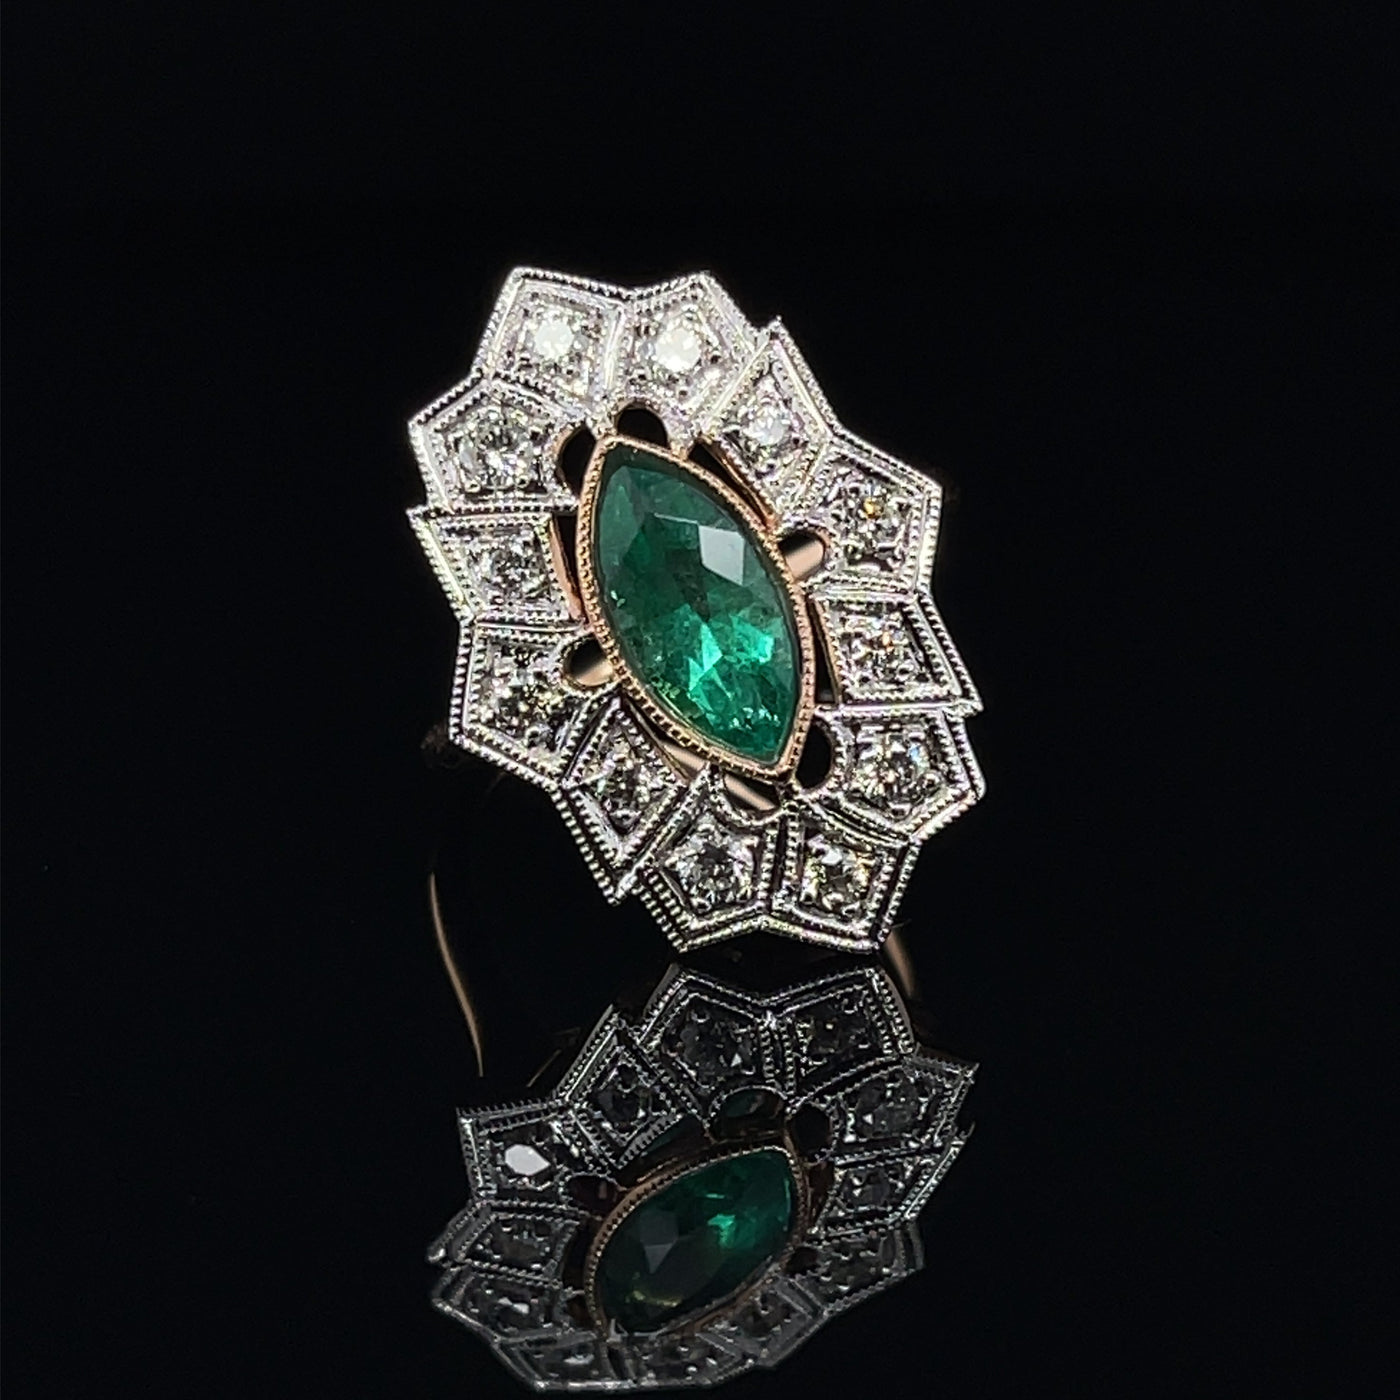 18CT Rose Gold Colombian Marquise Emerald and Diamond Ring